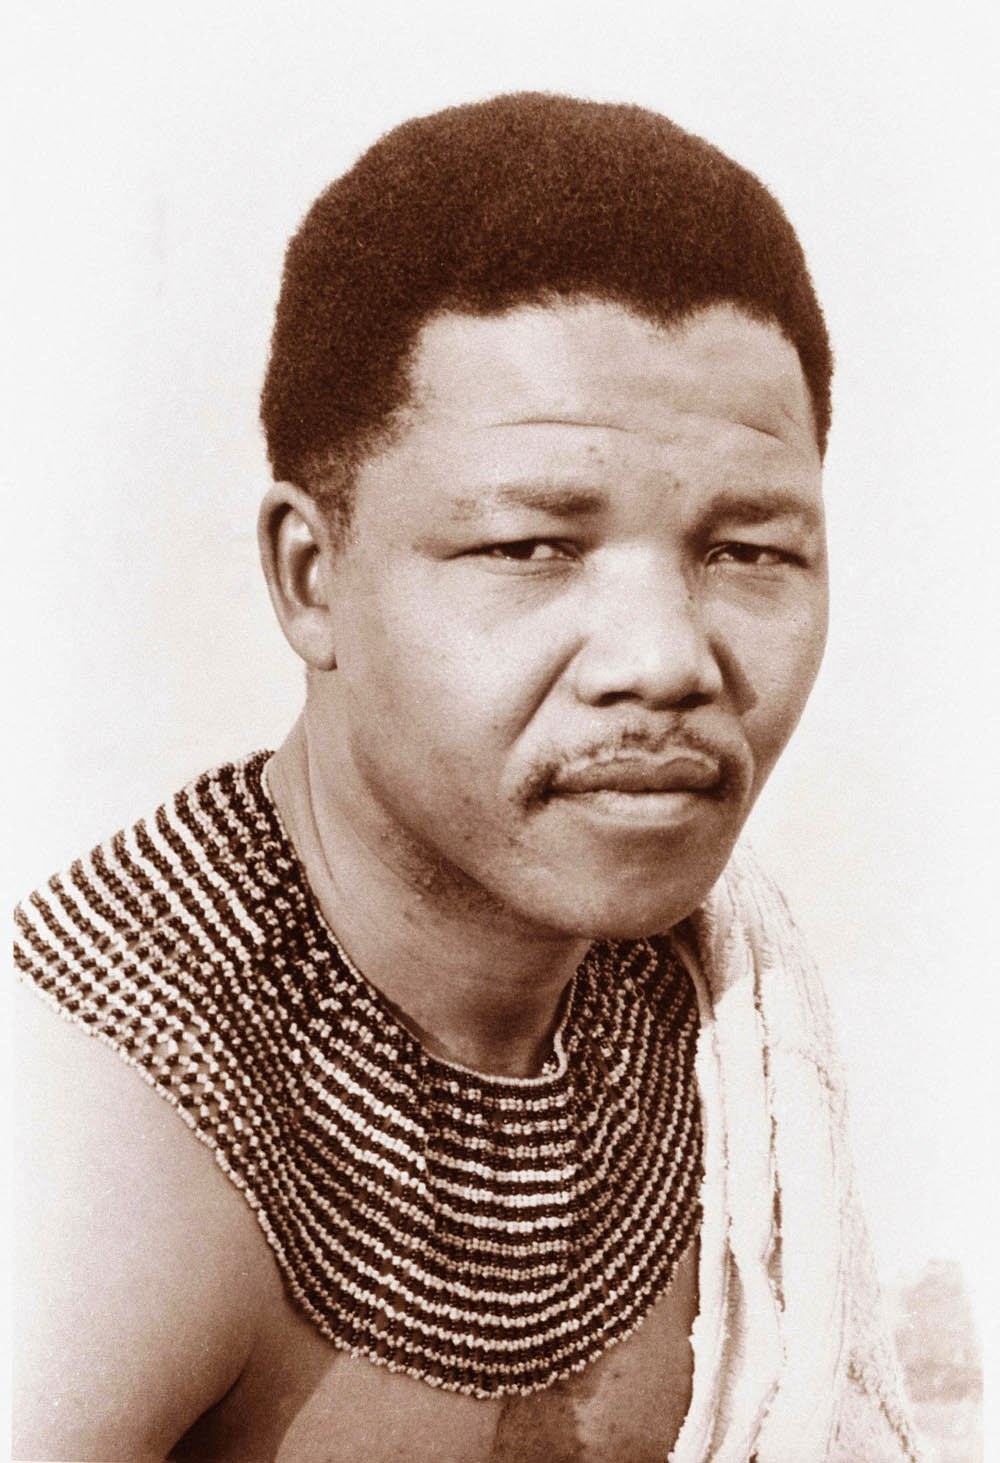 Fascinating Historical Picture of Nelson Mandela in 1962 